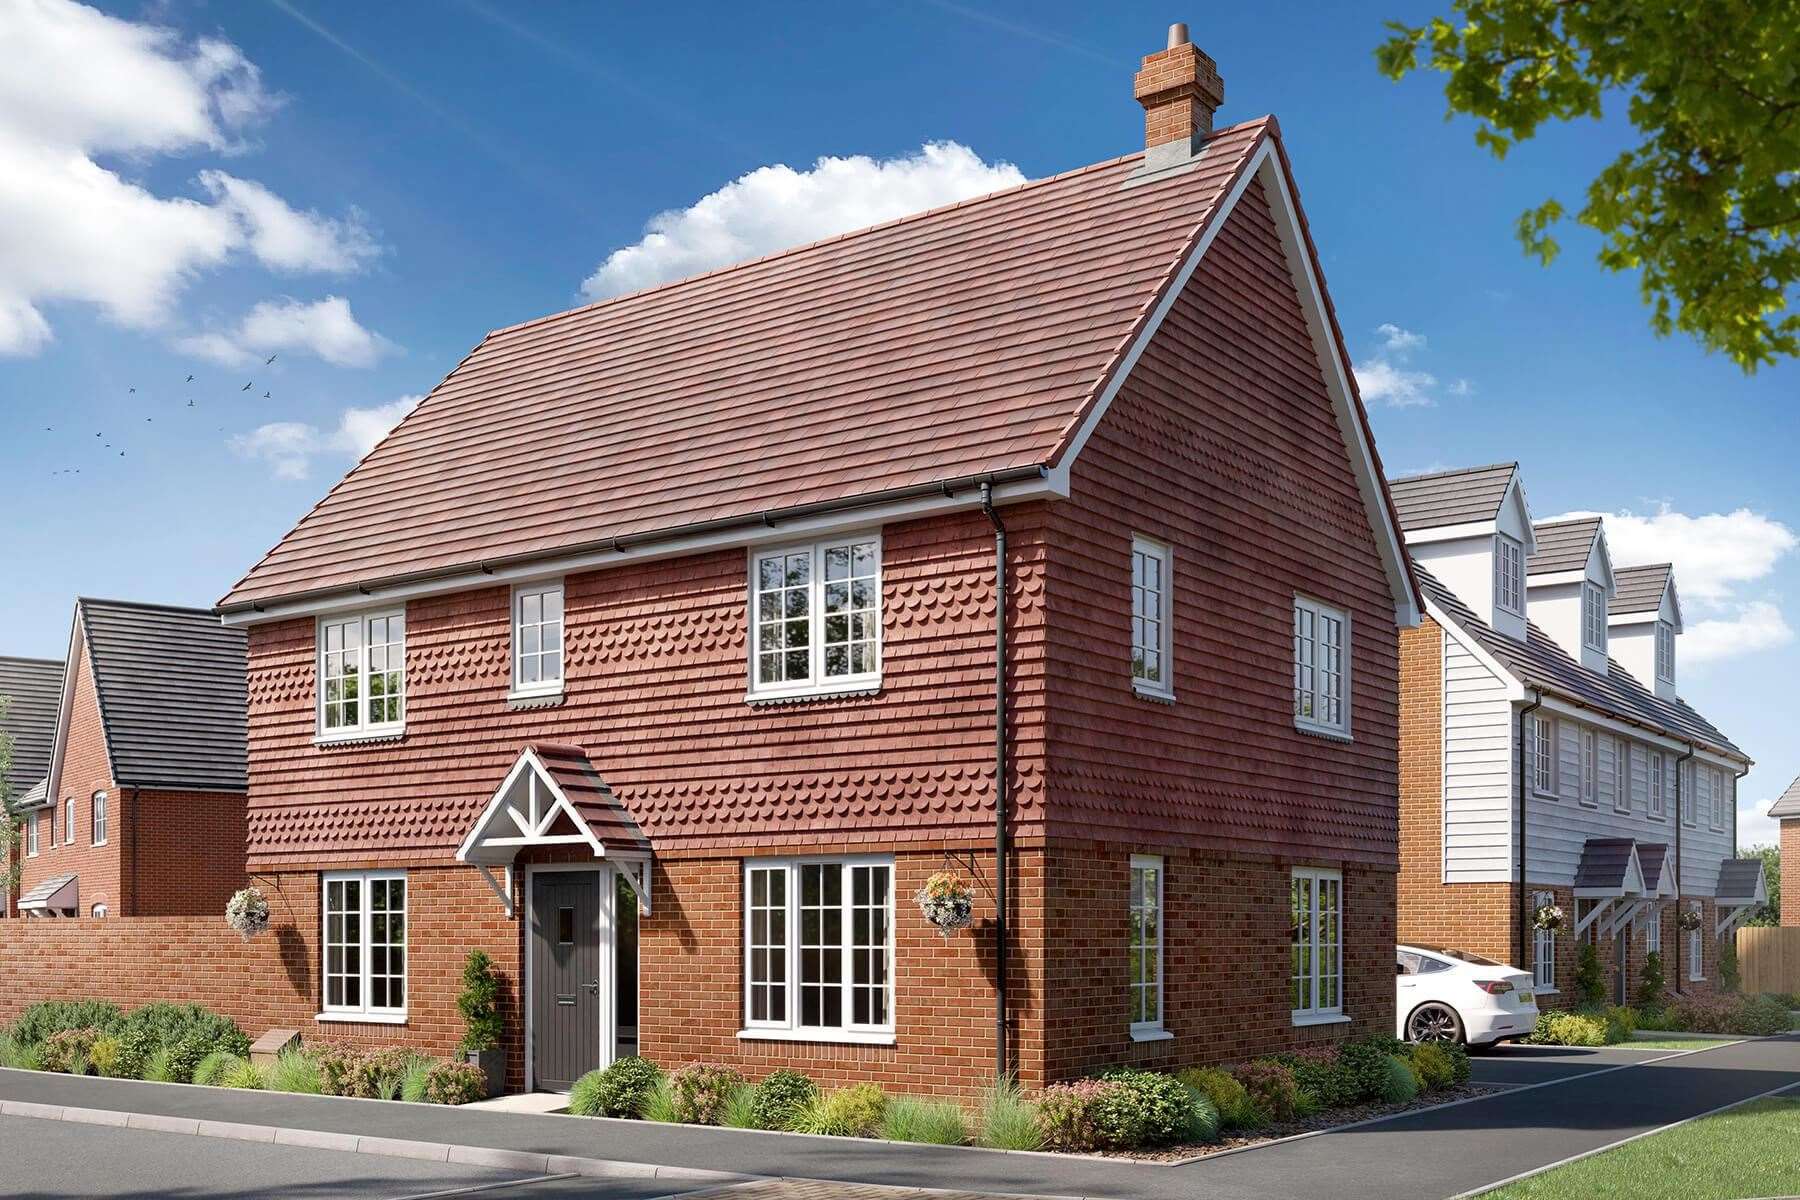 Leading home builder Taylor Wimpey has recently launched St Augustine's Place